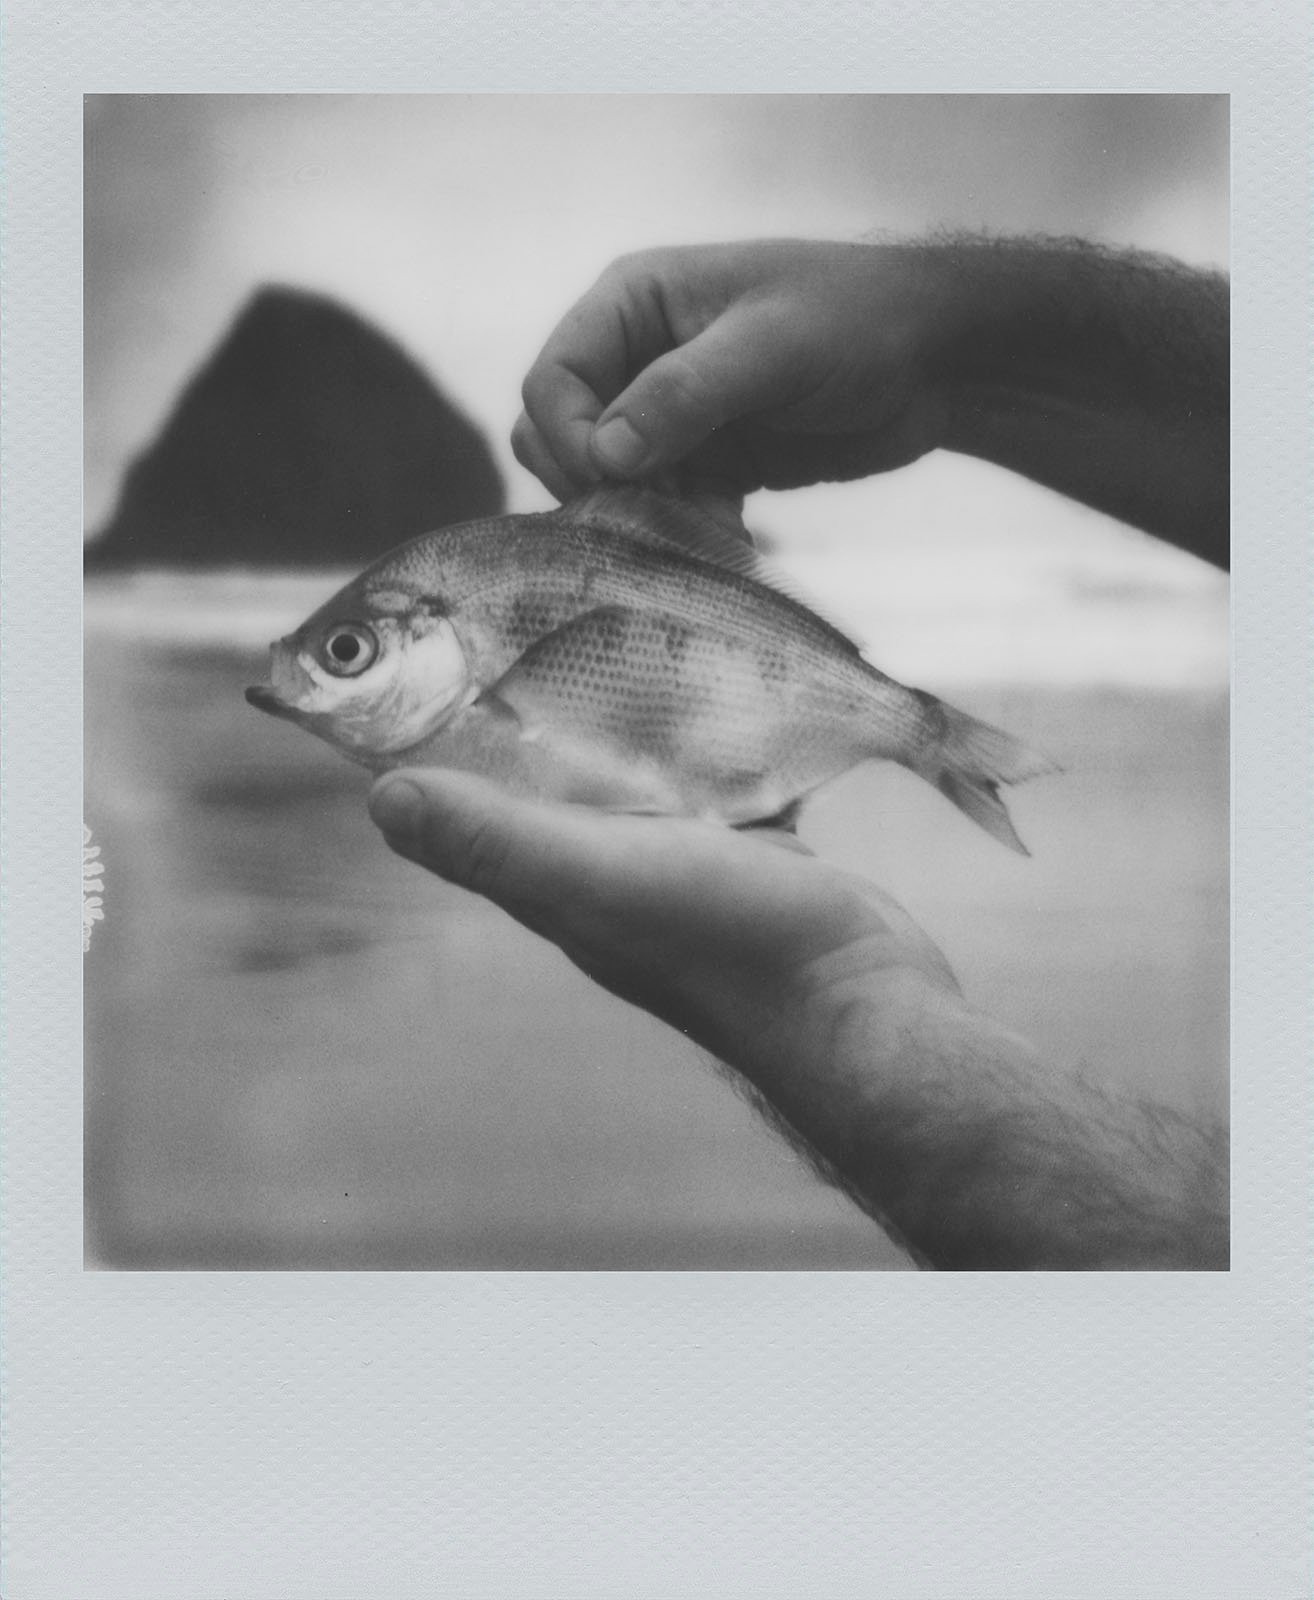 Black and white photo of hands holding a small fish with a blurred natural landscape and a large rock formation in the background.